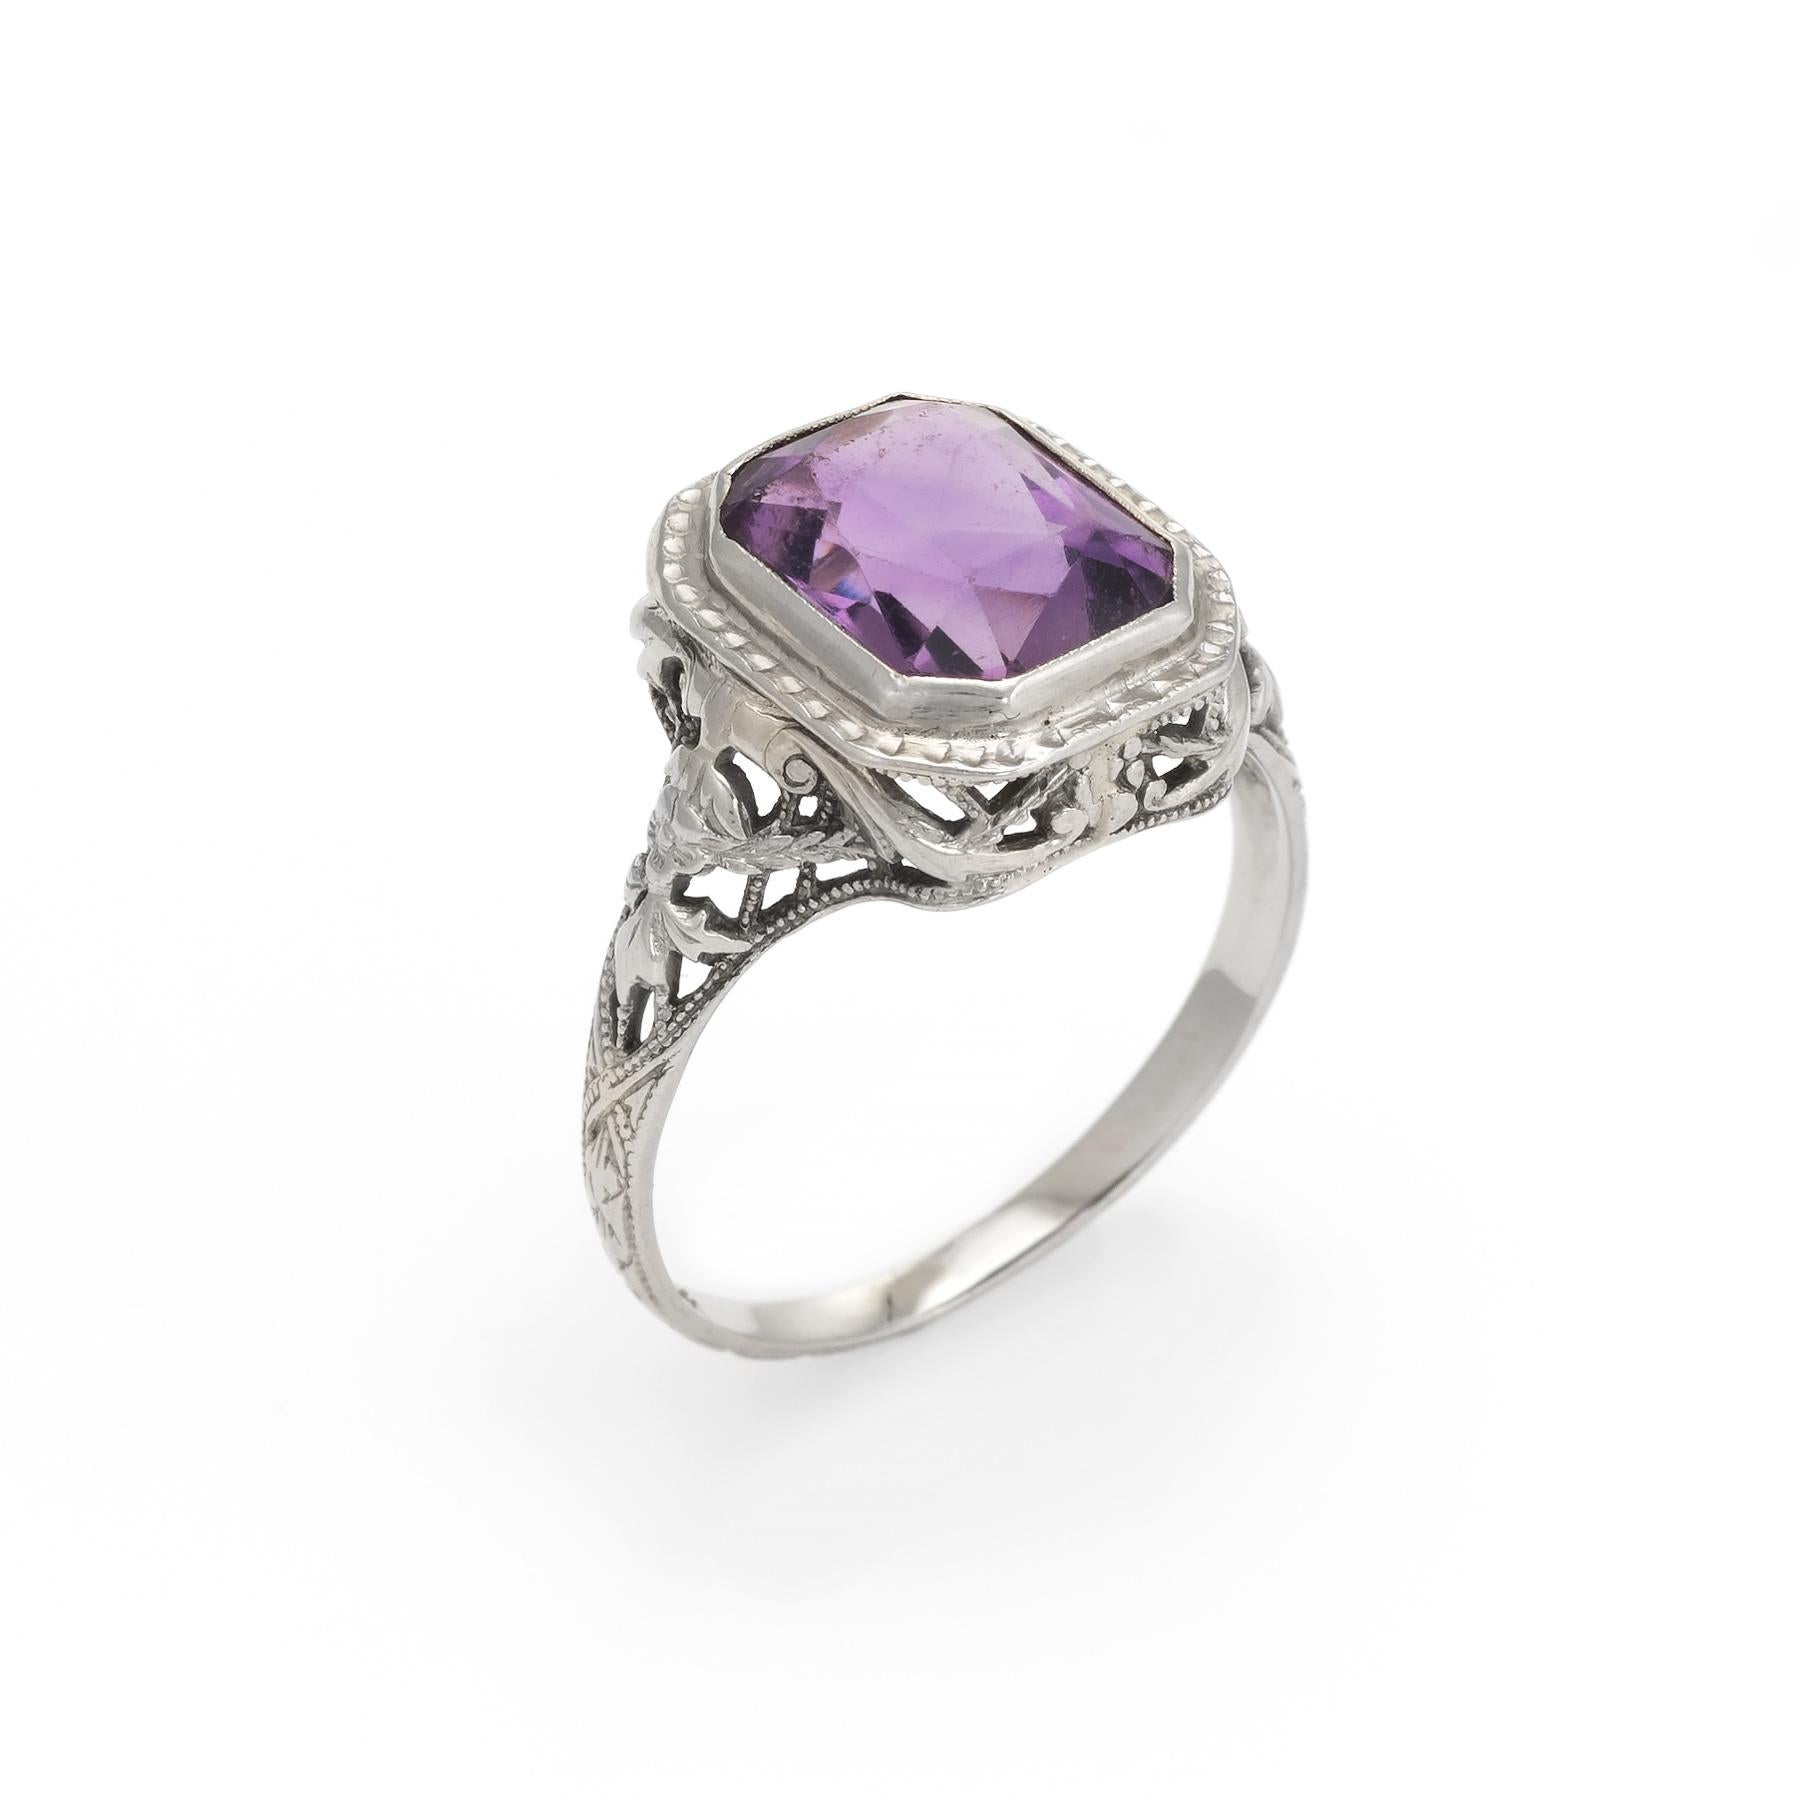 Finely detailed vintage Art Deco era cocktail ring (circa 1920s to 1930s), crafted in 14 karat white gold. 

Centrally mounted amethyst measures 9mm x 7mm (estimated at 2 carats). The amethyst is in excellent condition and free of cracks or chips.  